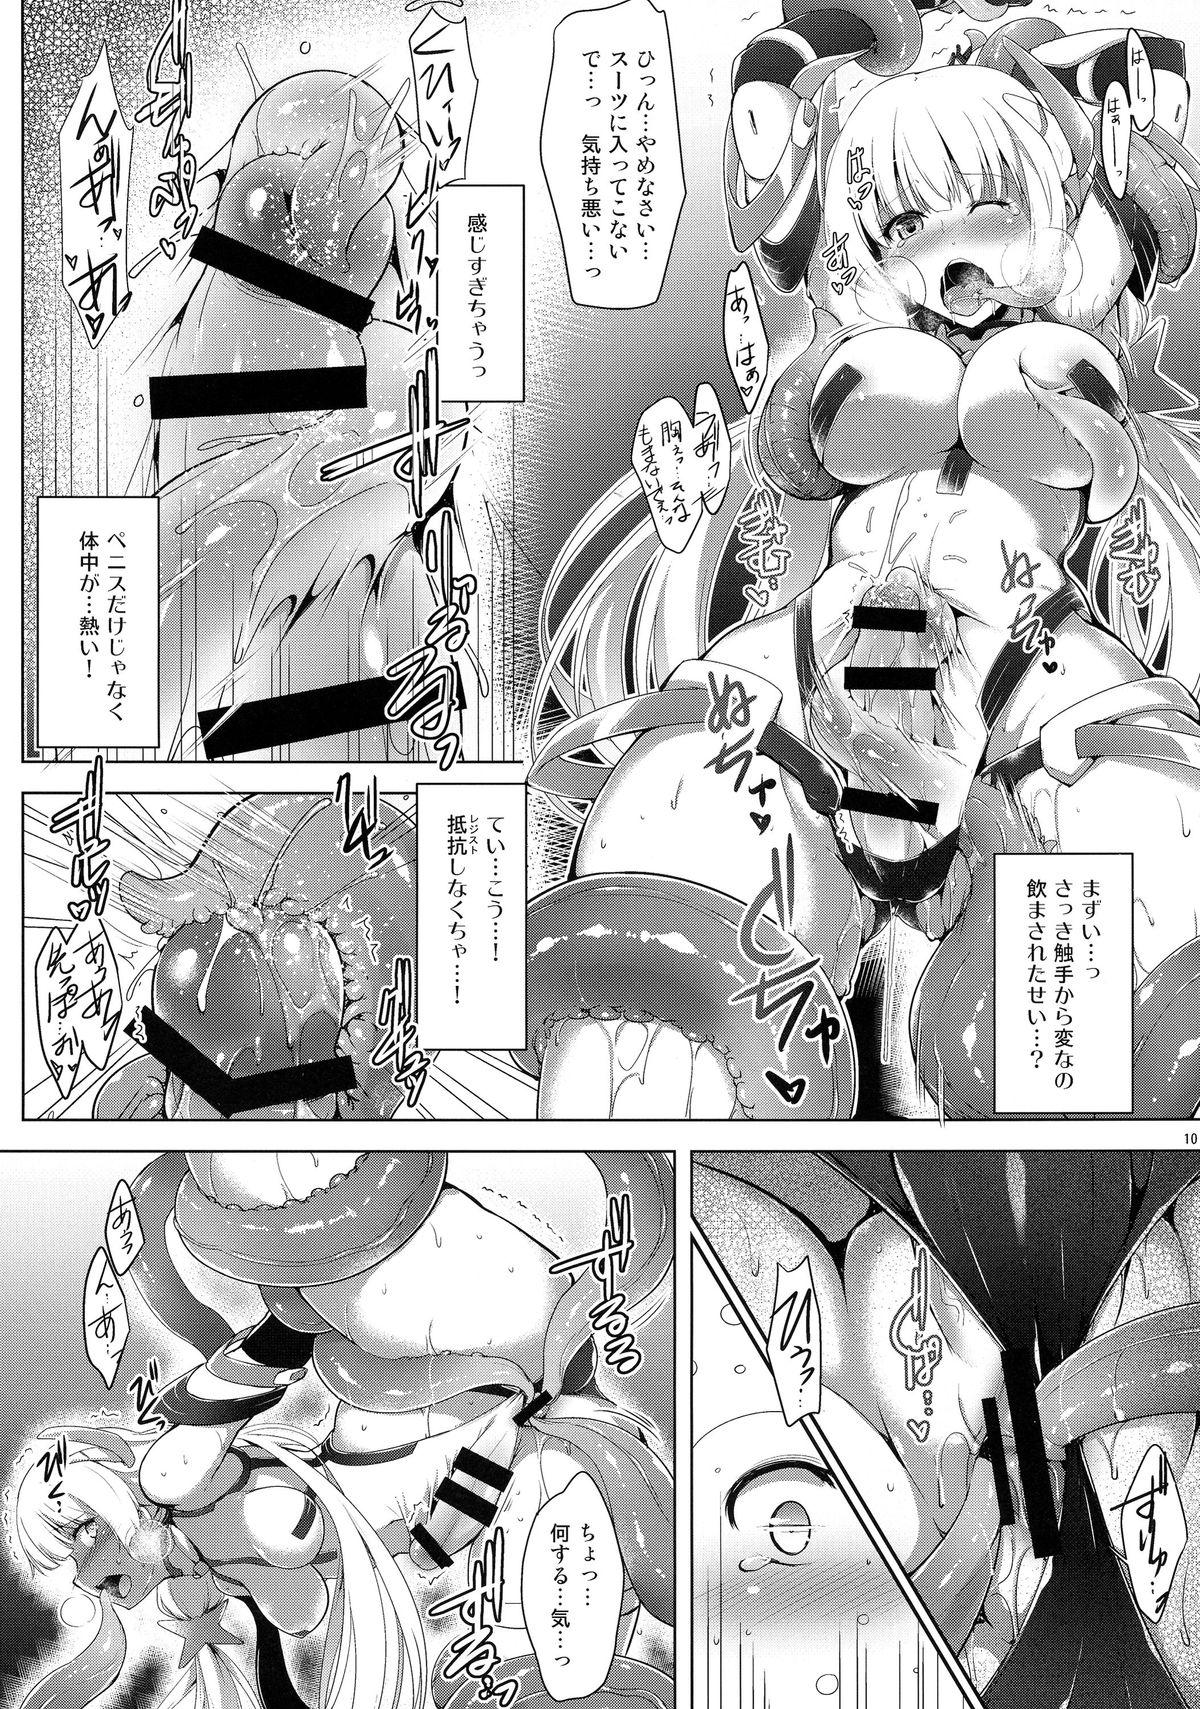 Girl Sucking Dick K.231 - Expelled from paradise Free Rough Porn - Page 10